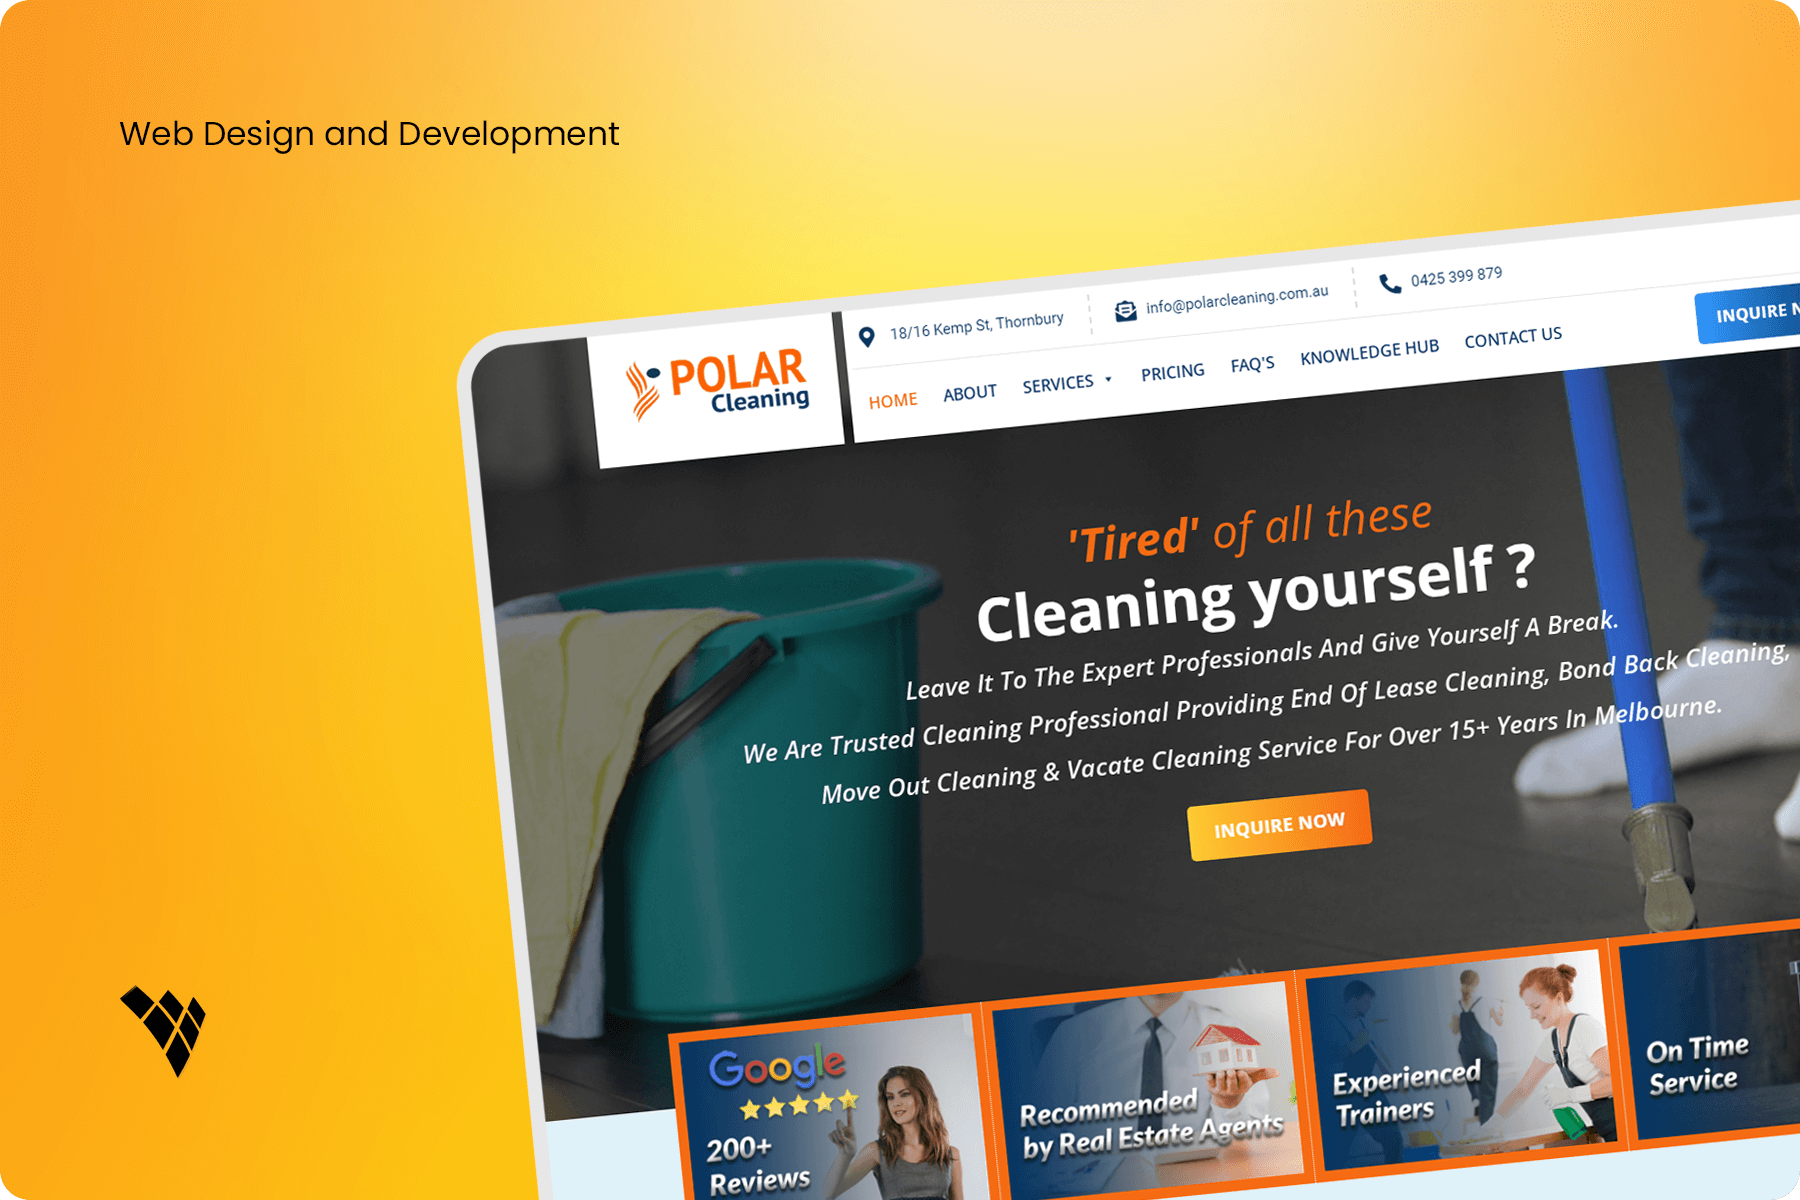 web design and development - polar cleaning